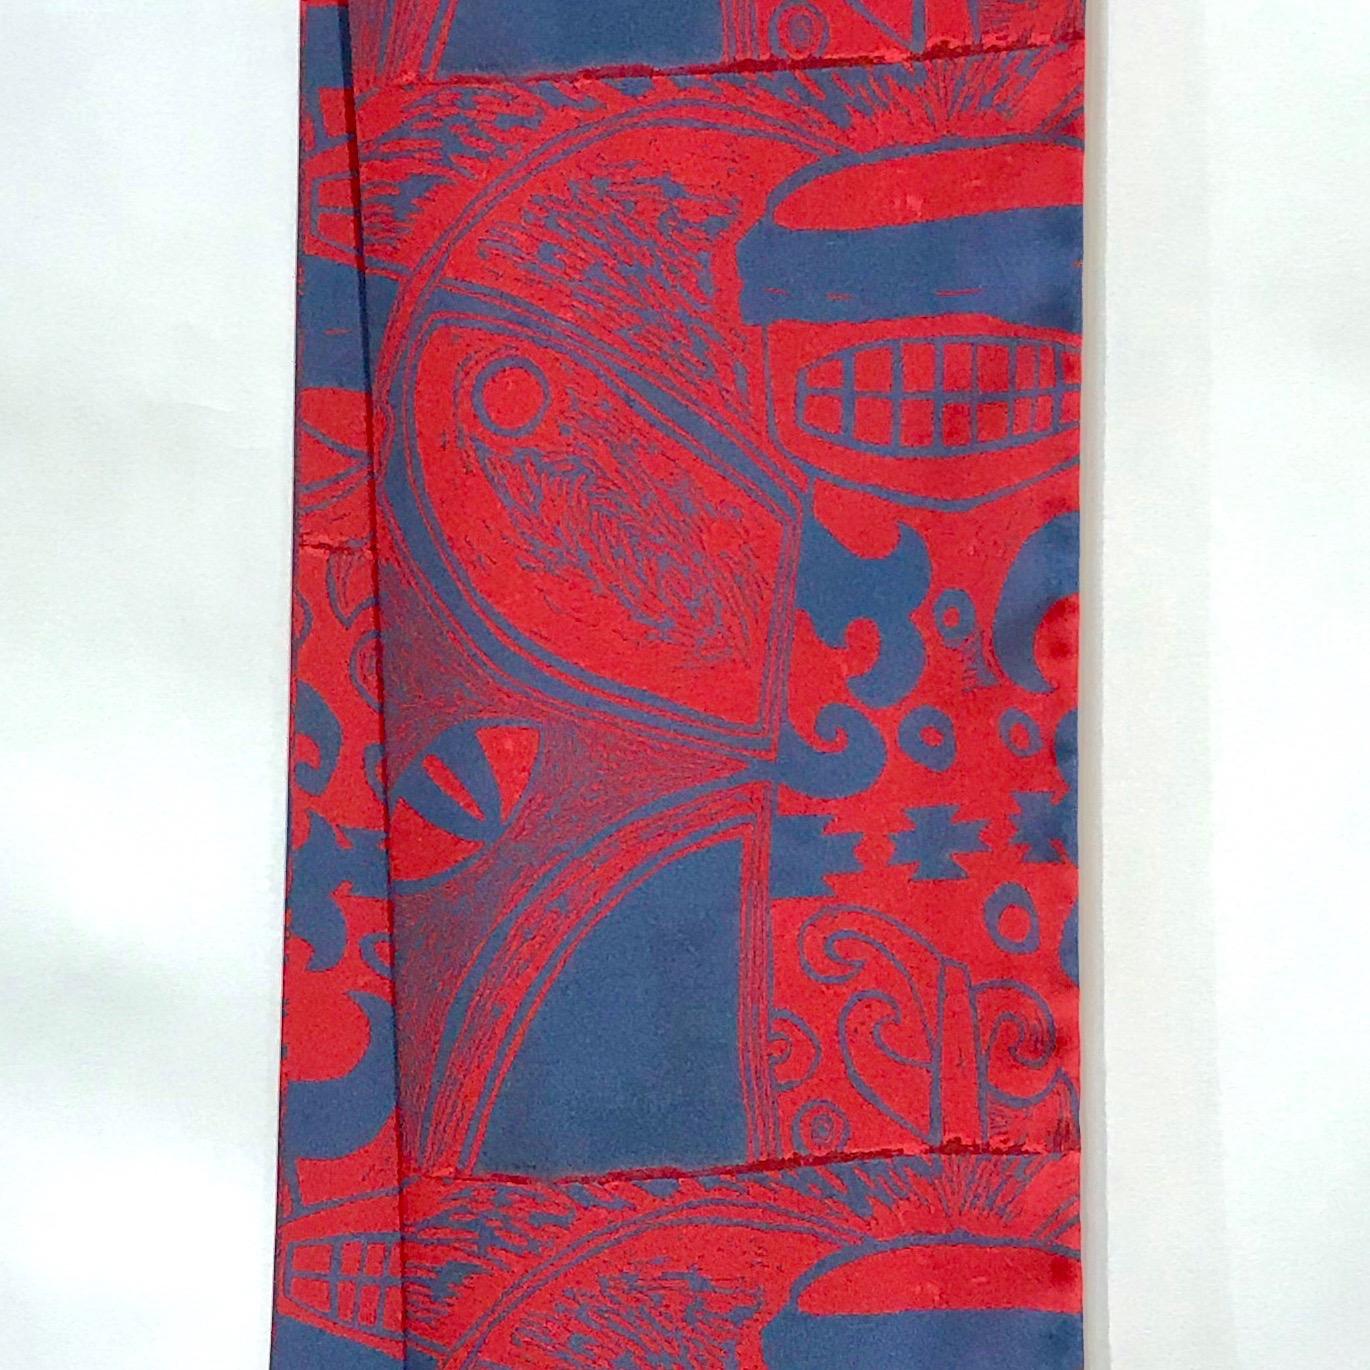 Pink He Sees, scarf, by Melanie Yazzie, bee, red, blue, artist designed, Navajo  For Sale